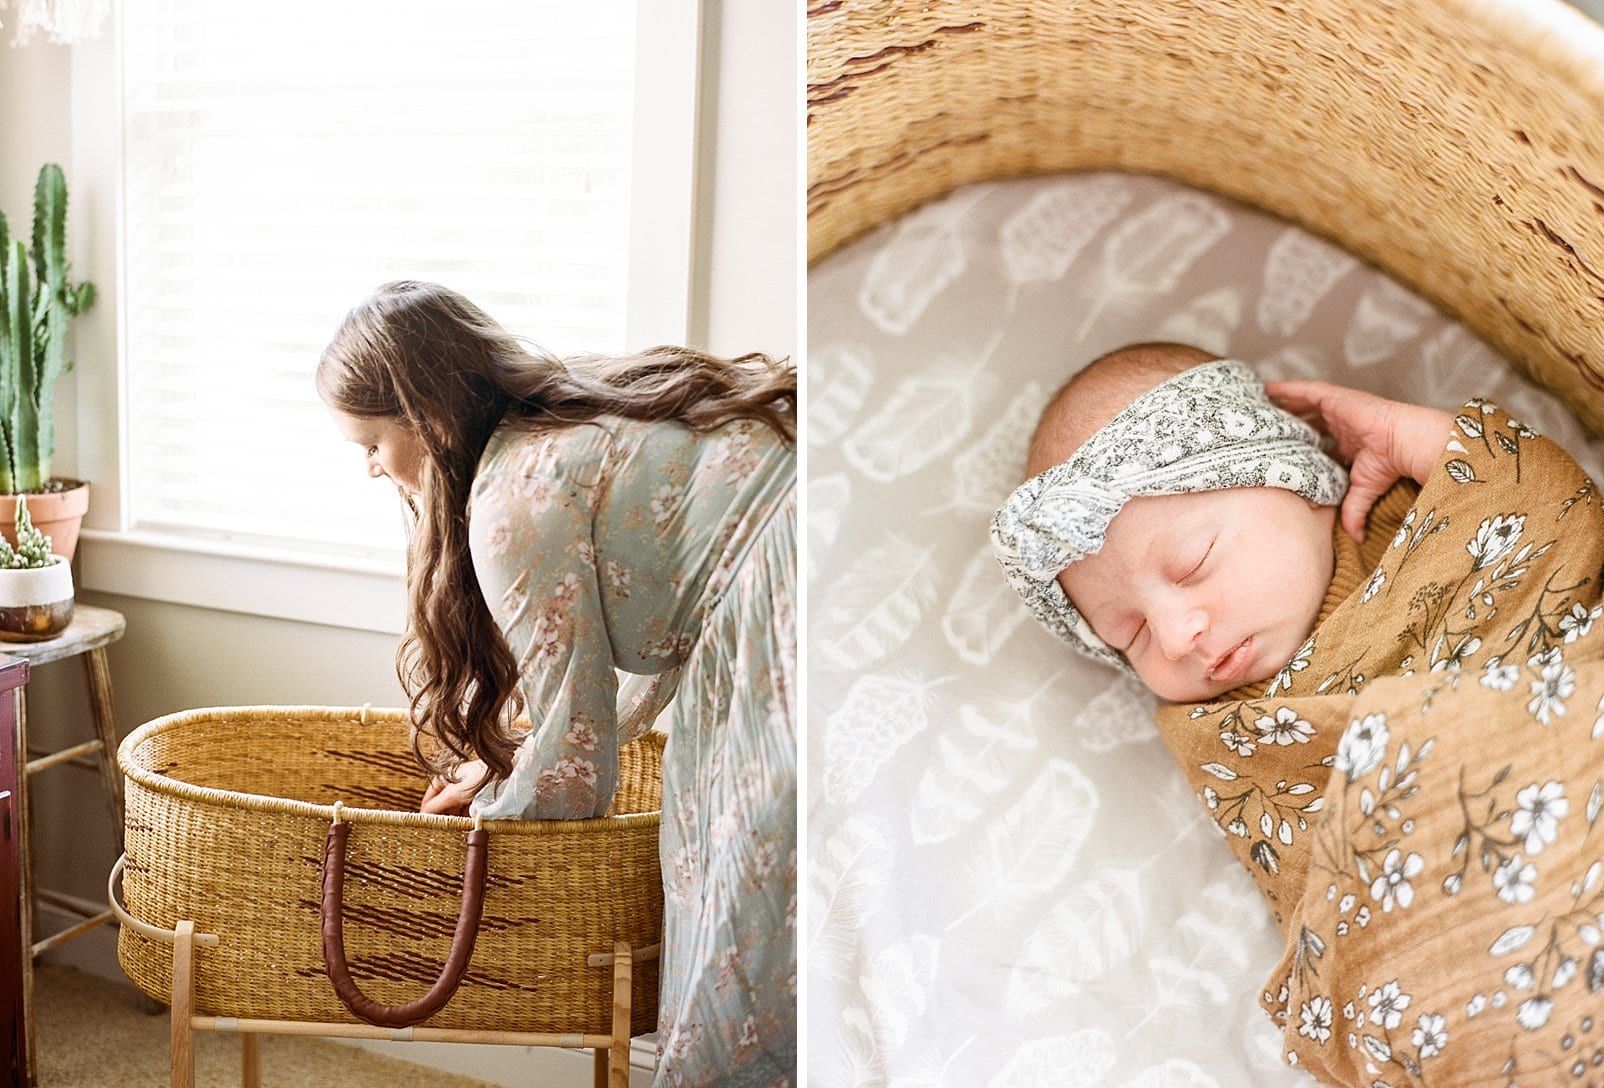 Raleigh mother setting her newborn daughter in a moses basket photo